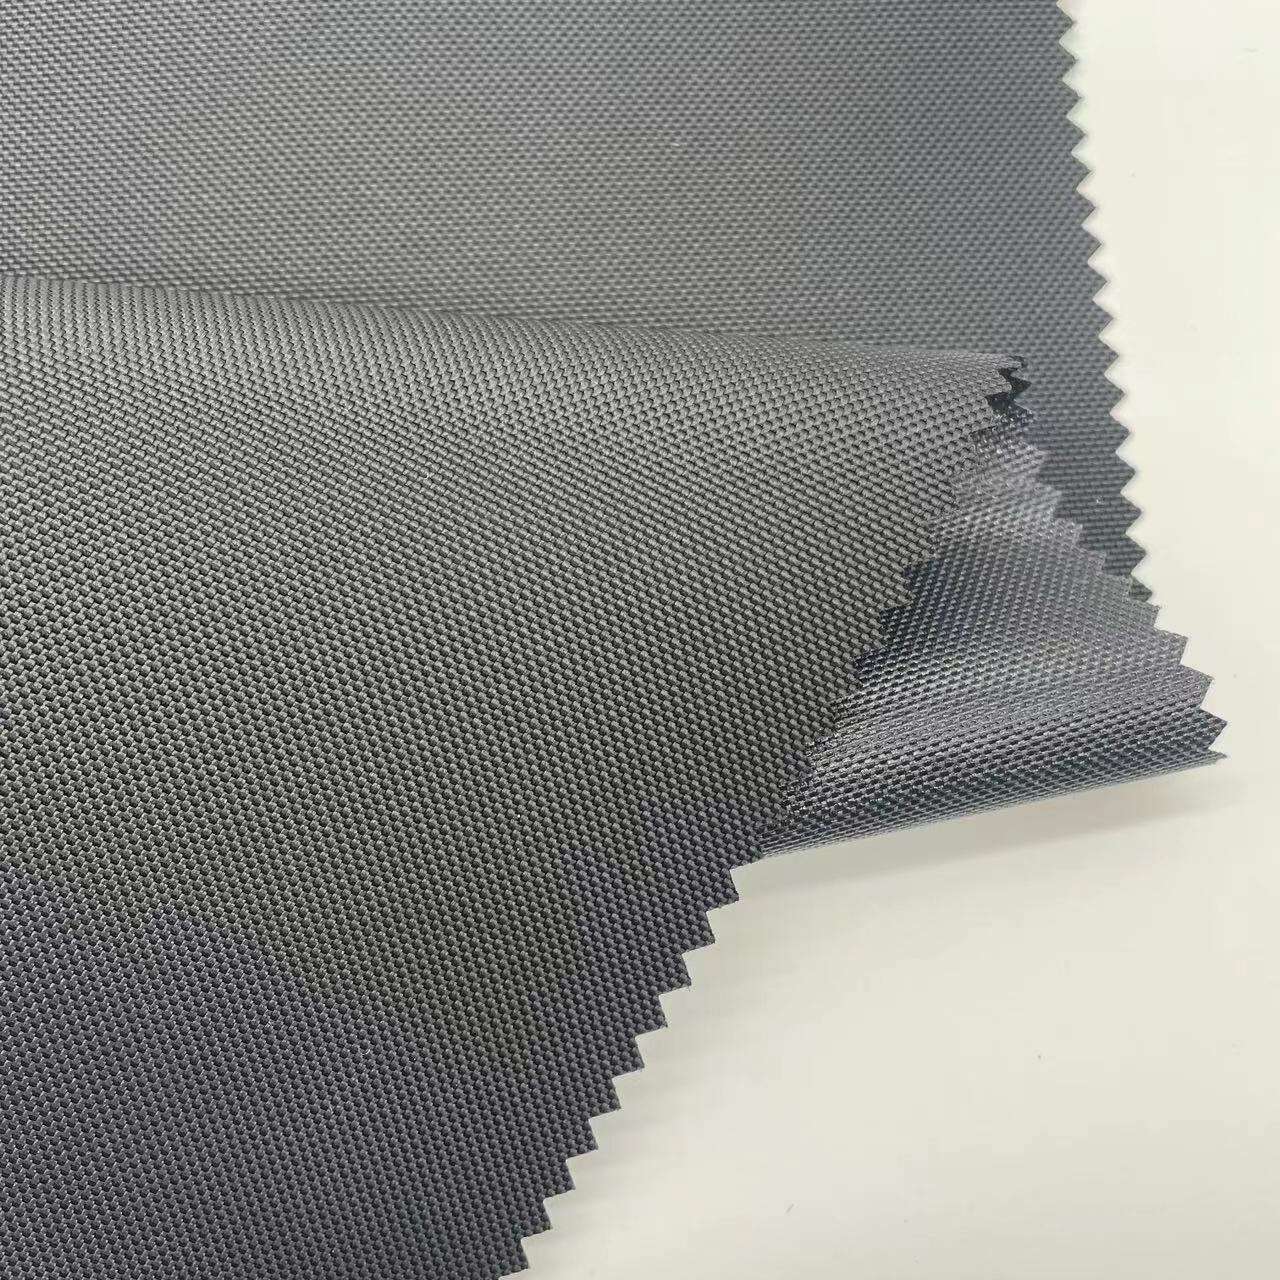 840 Denier Coated Jr ballistic nylon fabric with  Eco Friendly C0 Durable Water Repellent Finish